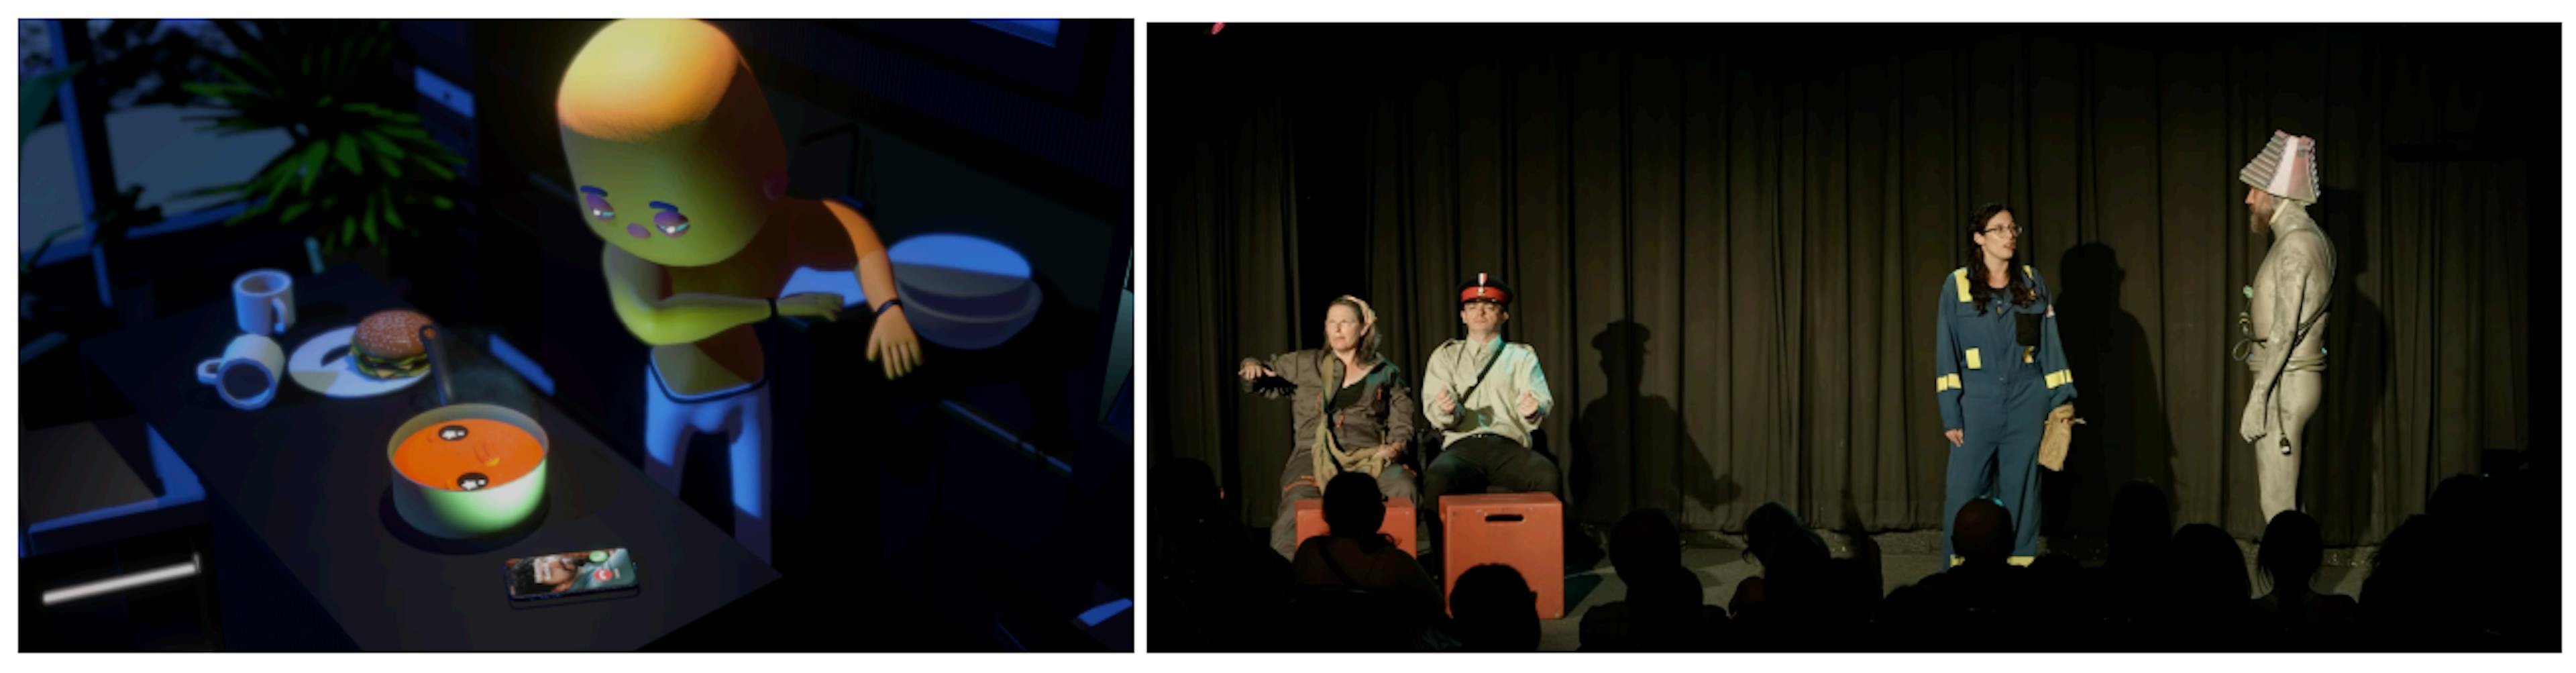 Fig. 4. (LEFT): Concept art used for a narrative test prototype of a virtual actor interpretation of the script Darren just can’t handle the temperature of his soup created by Participant p13. Used with Permission from Transitional Forms. (RIGHT): Photo of human actors interpreting the script Cars: The Day The Earth Stood Still as part of the Plays By Bots series of performances of scripts co-written with Dramatron and director Participant p1. Used with Permission from Rapid Fire Theatre.